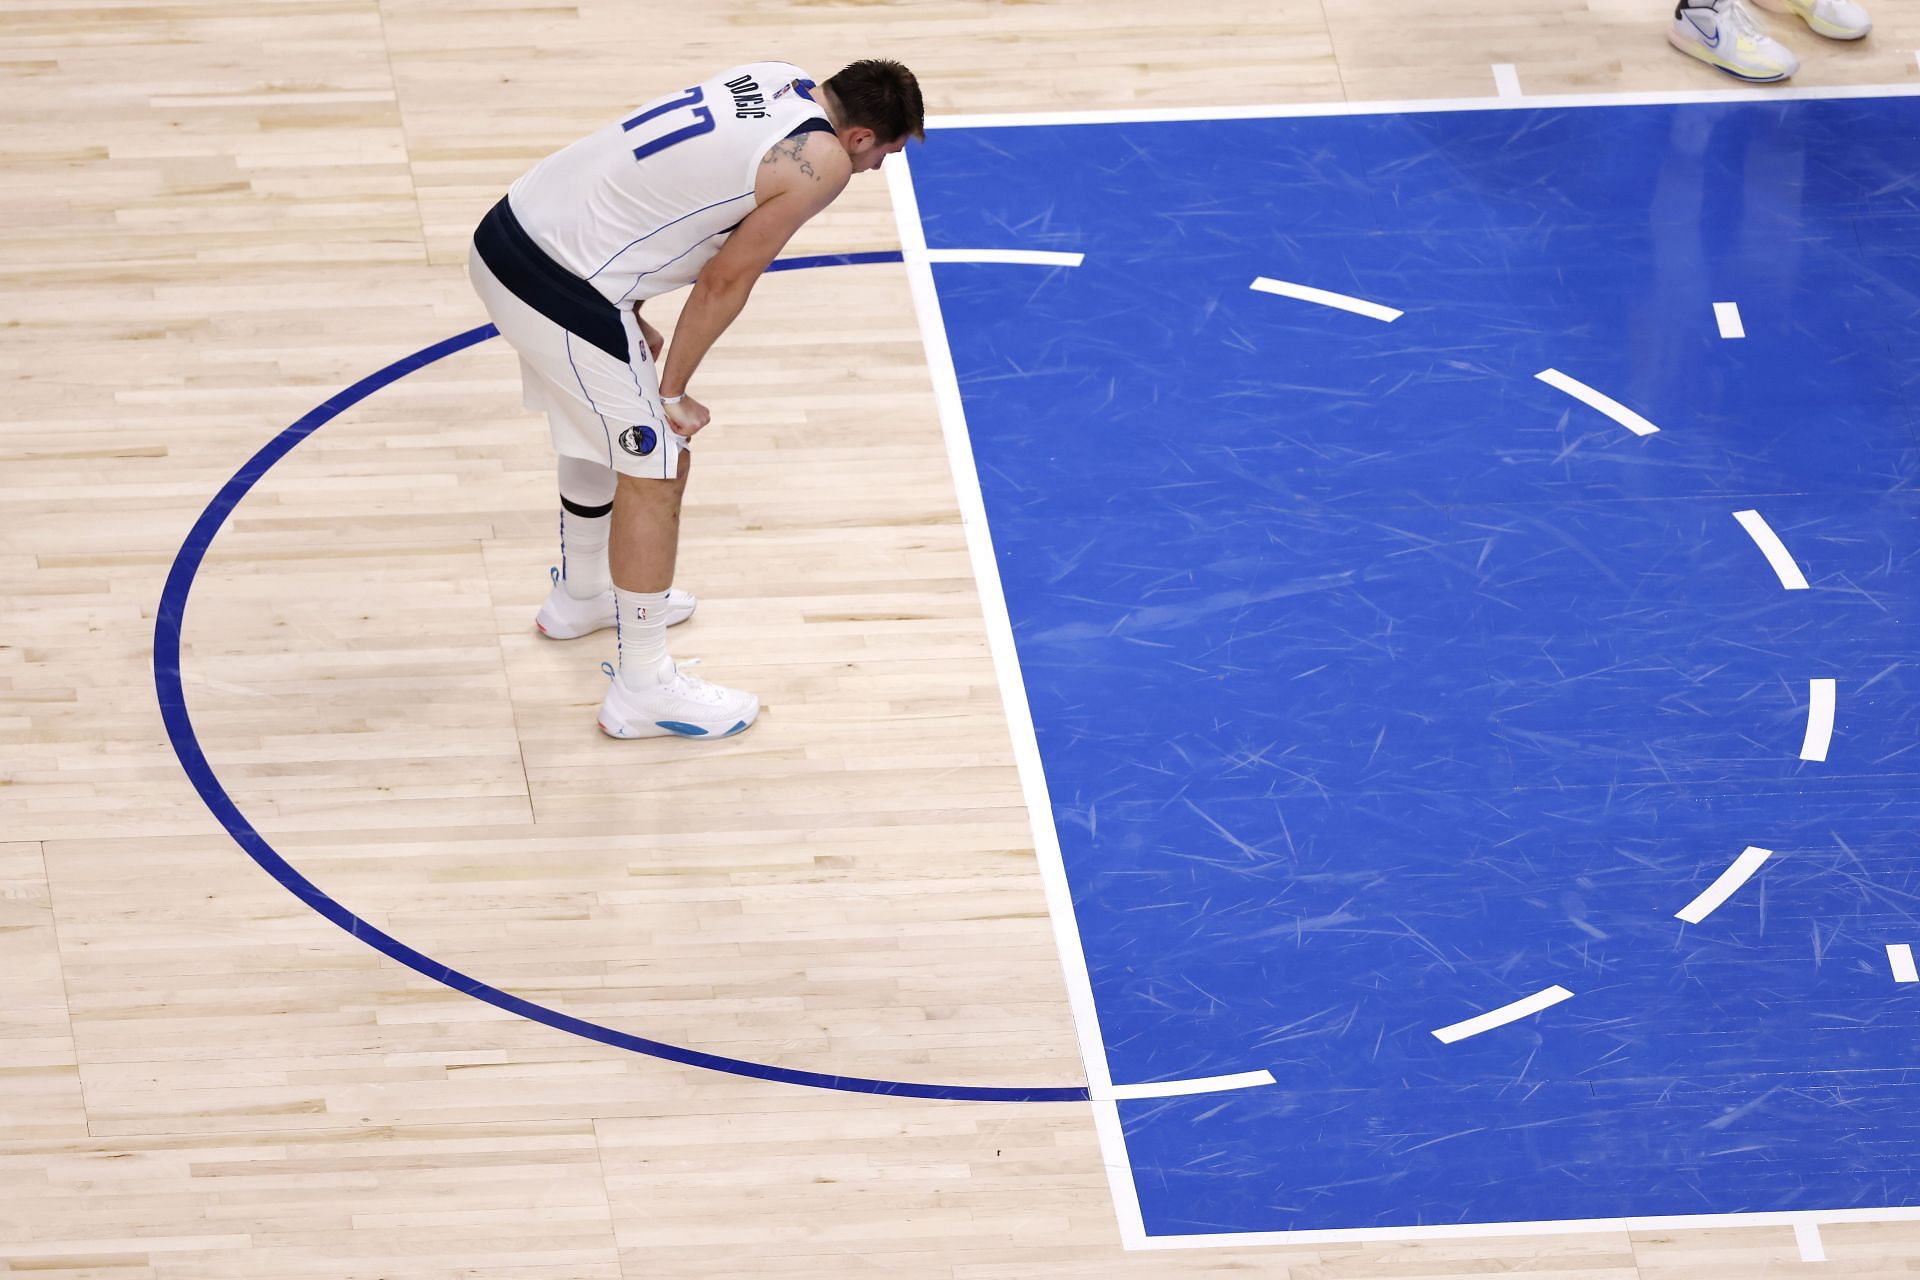 Luka Doncic prepares to shoot a free-throw